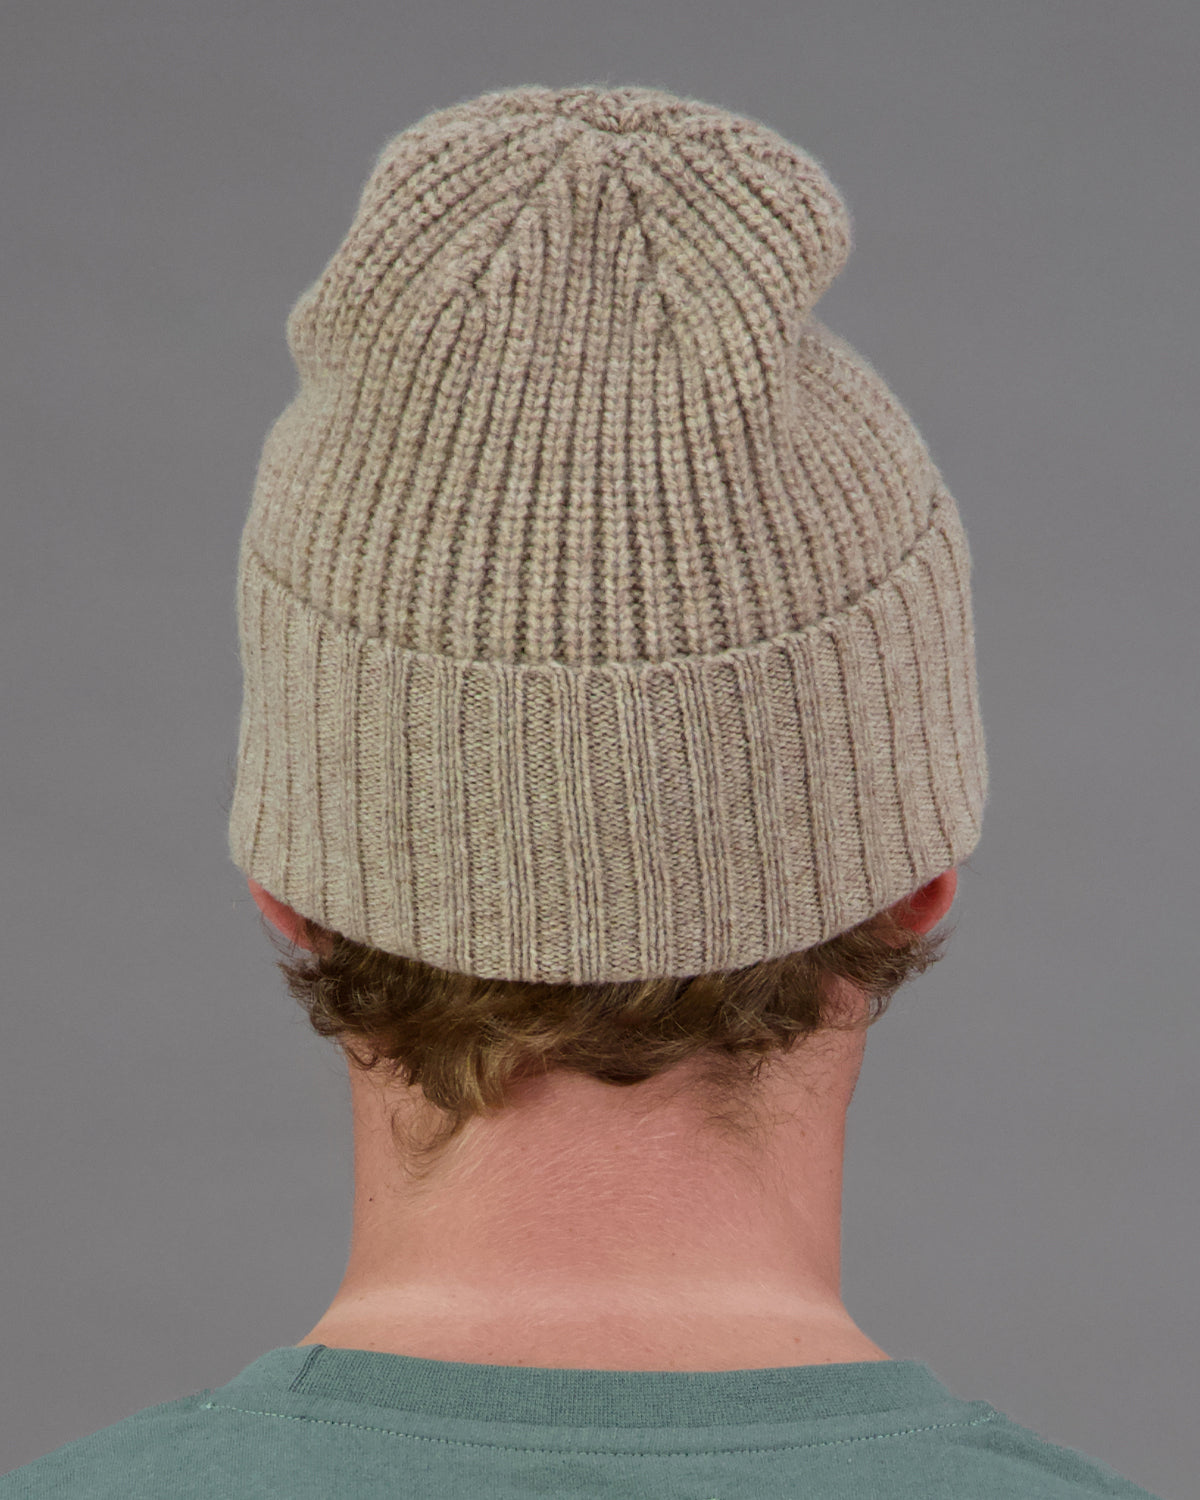 Just Another Fisherman Global Angler Beanie - Oatmeal